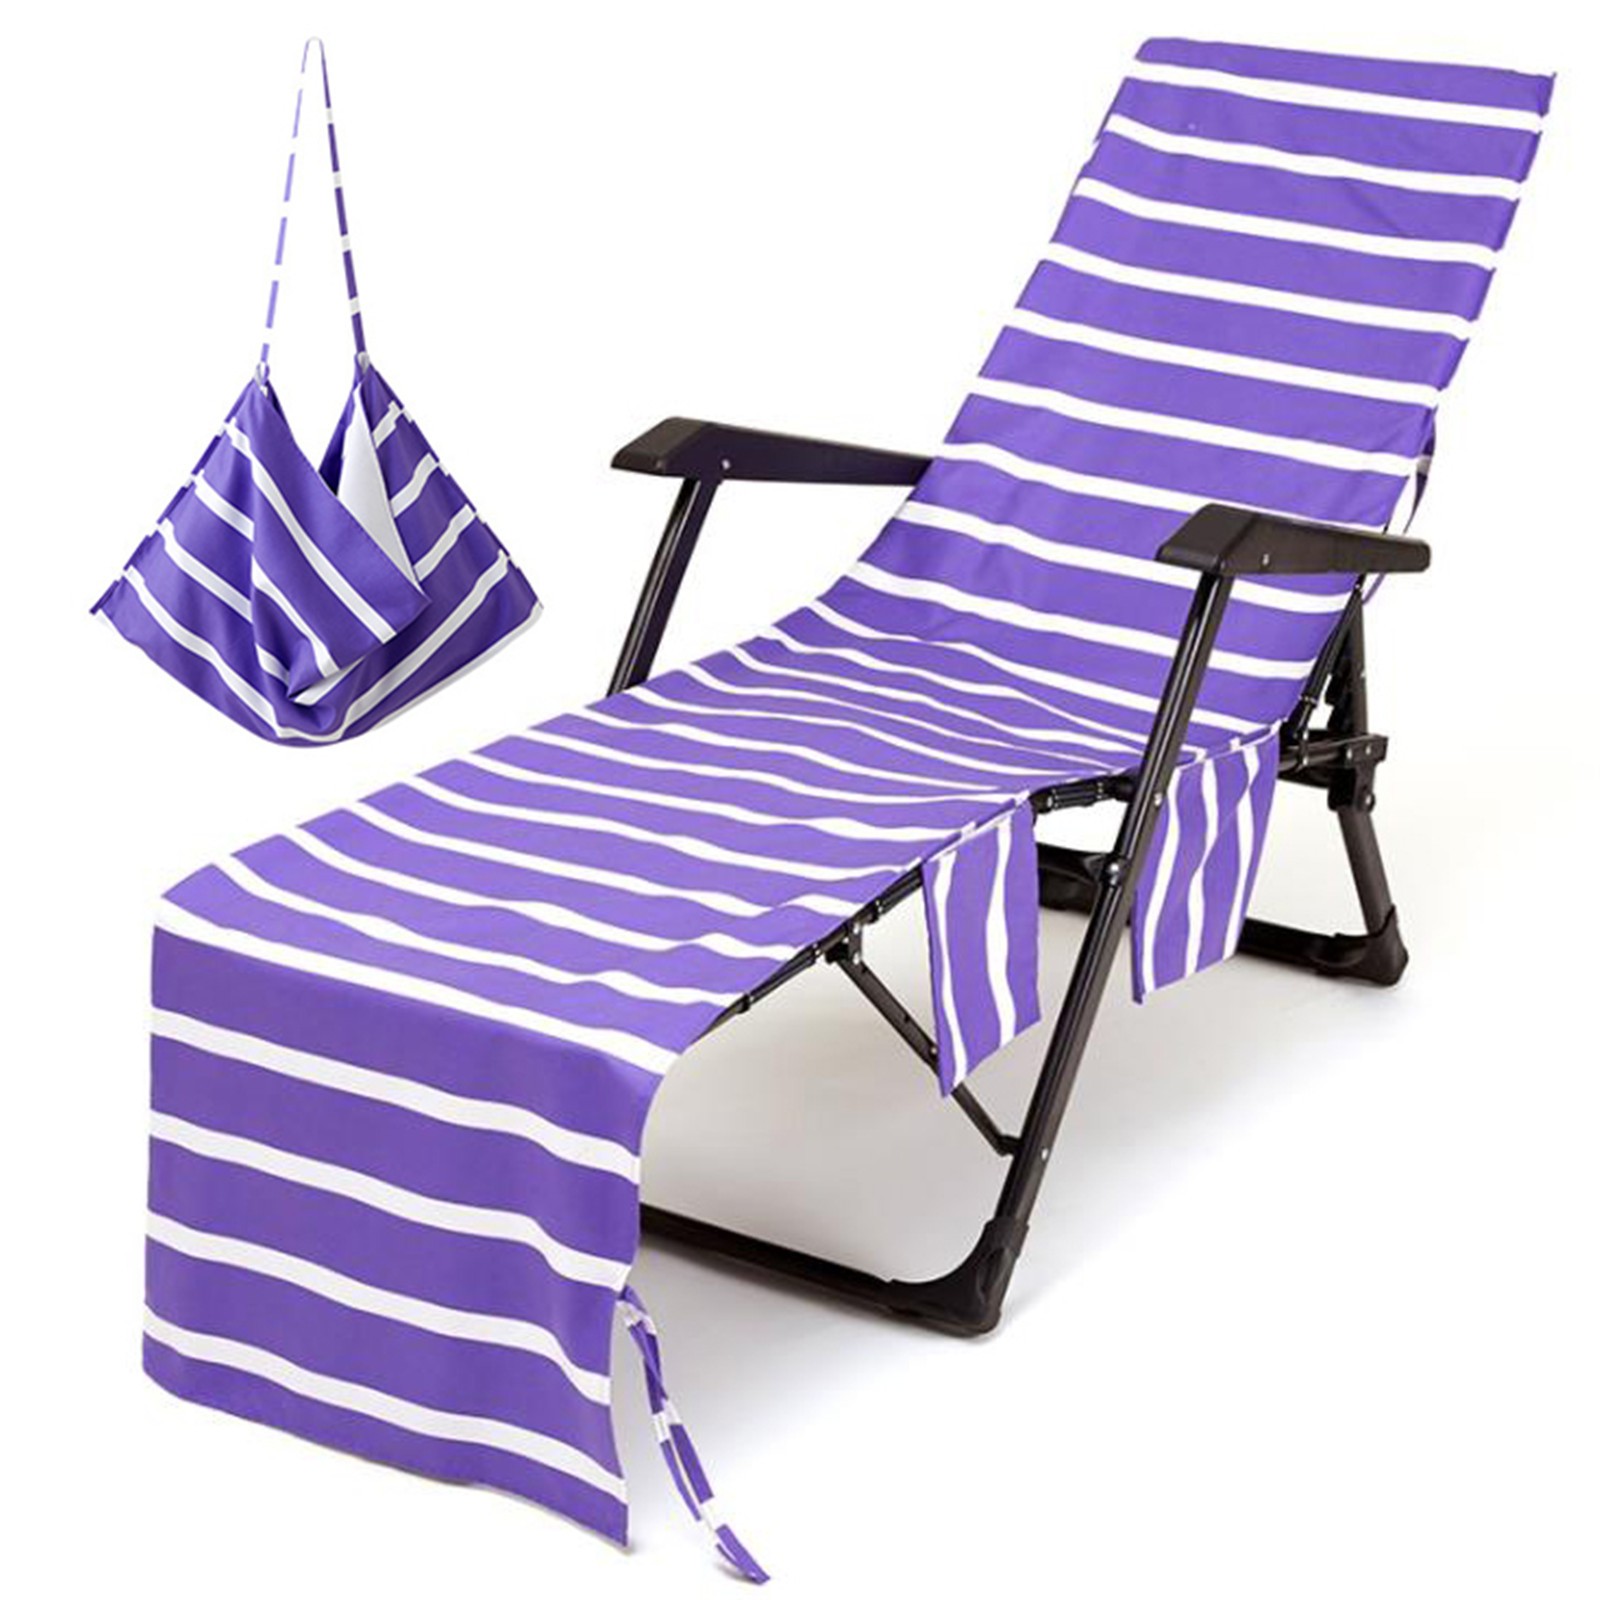 Wovilon Stripe Chair Cover Printed Beach Towel Polyester Cotton Lounge Chair Towel Striped Beach Chair Cover Printed Beach Towel - image 3 of 4